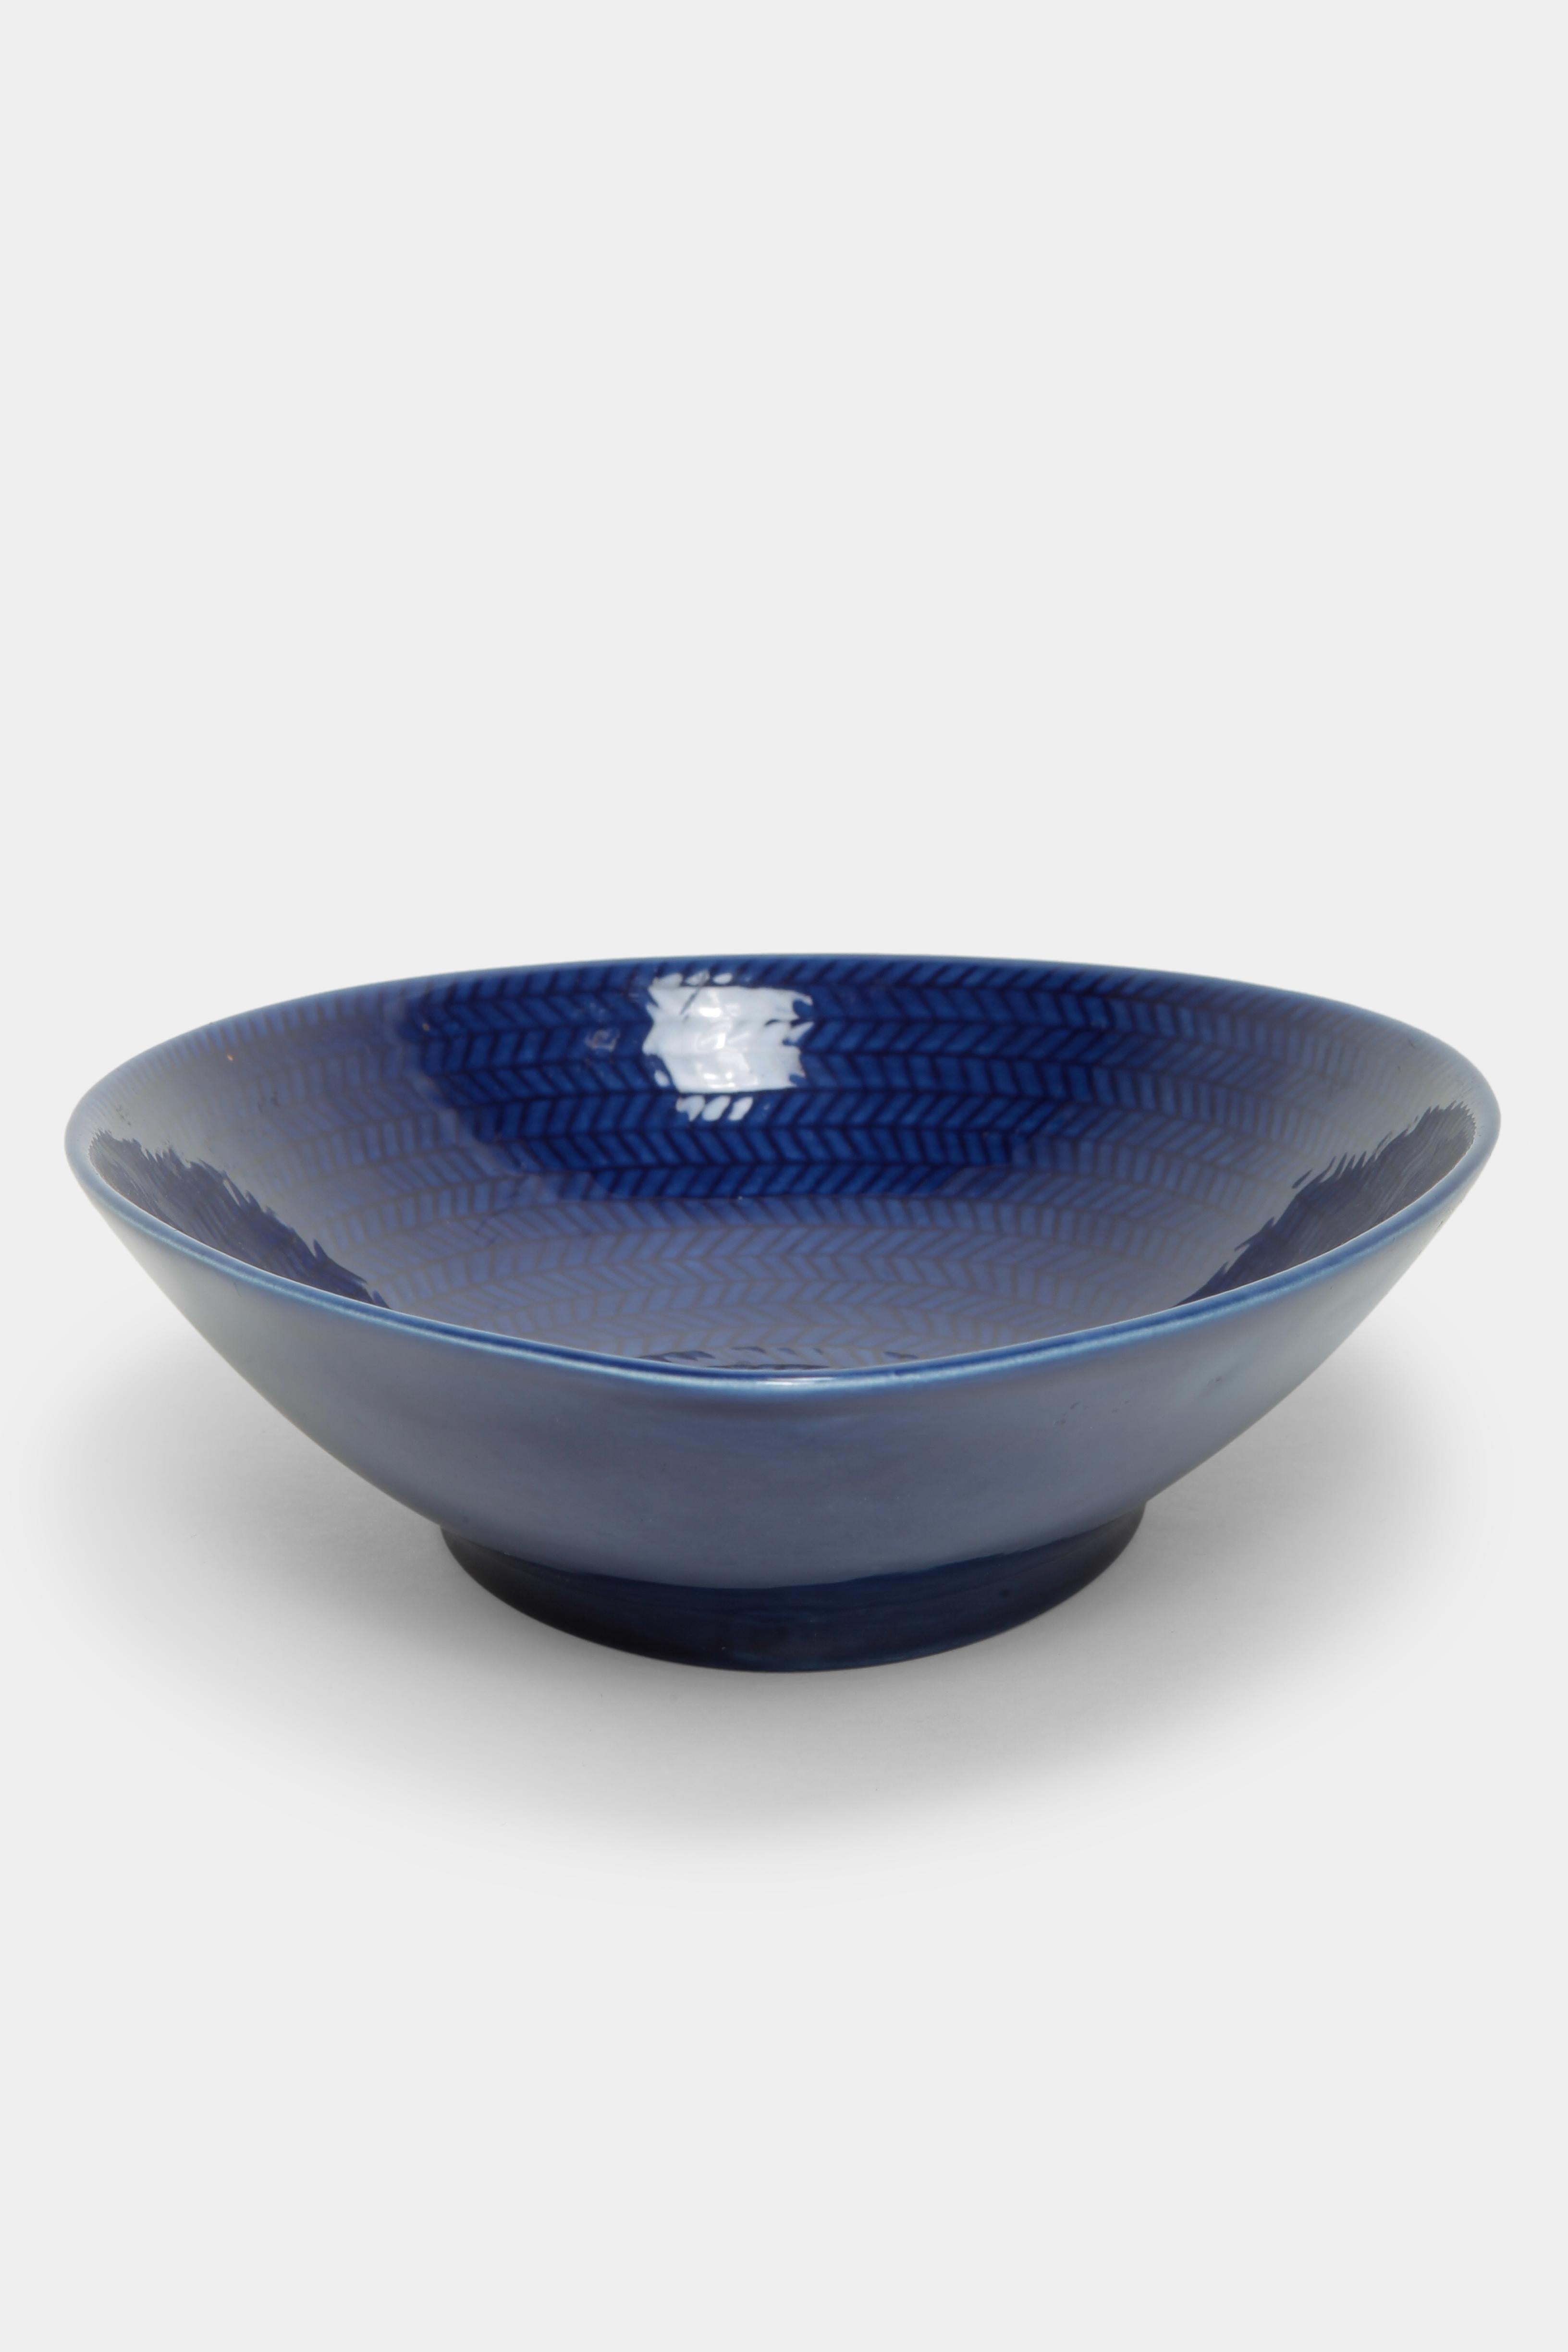 Ceramic bowl by Hertha Bengtson designed for the Swedish manufacturer Rörstrand in the 1950s. Belongs to the Blå Eld (blue fire) series. The elongated bowl has a deep blue color with an intricate pattern on the inside.